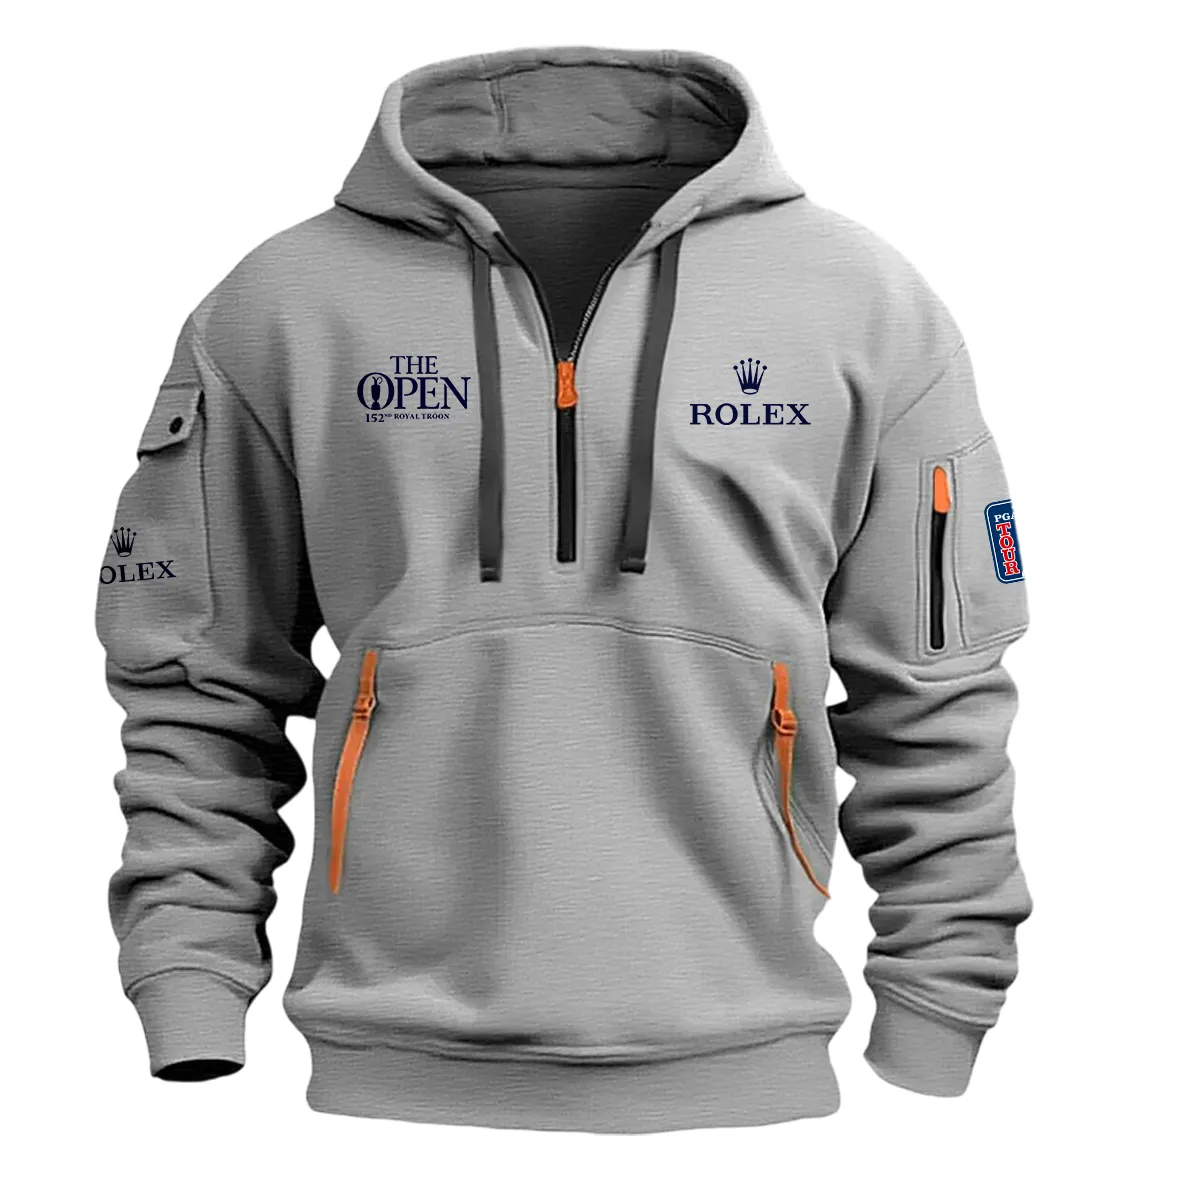 Gray Color Rolex Fashion Hoodie Half Zipper 152nd The Open Championship Gift For Fans